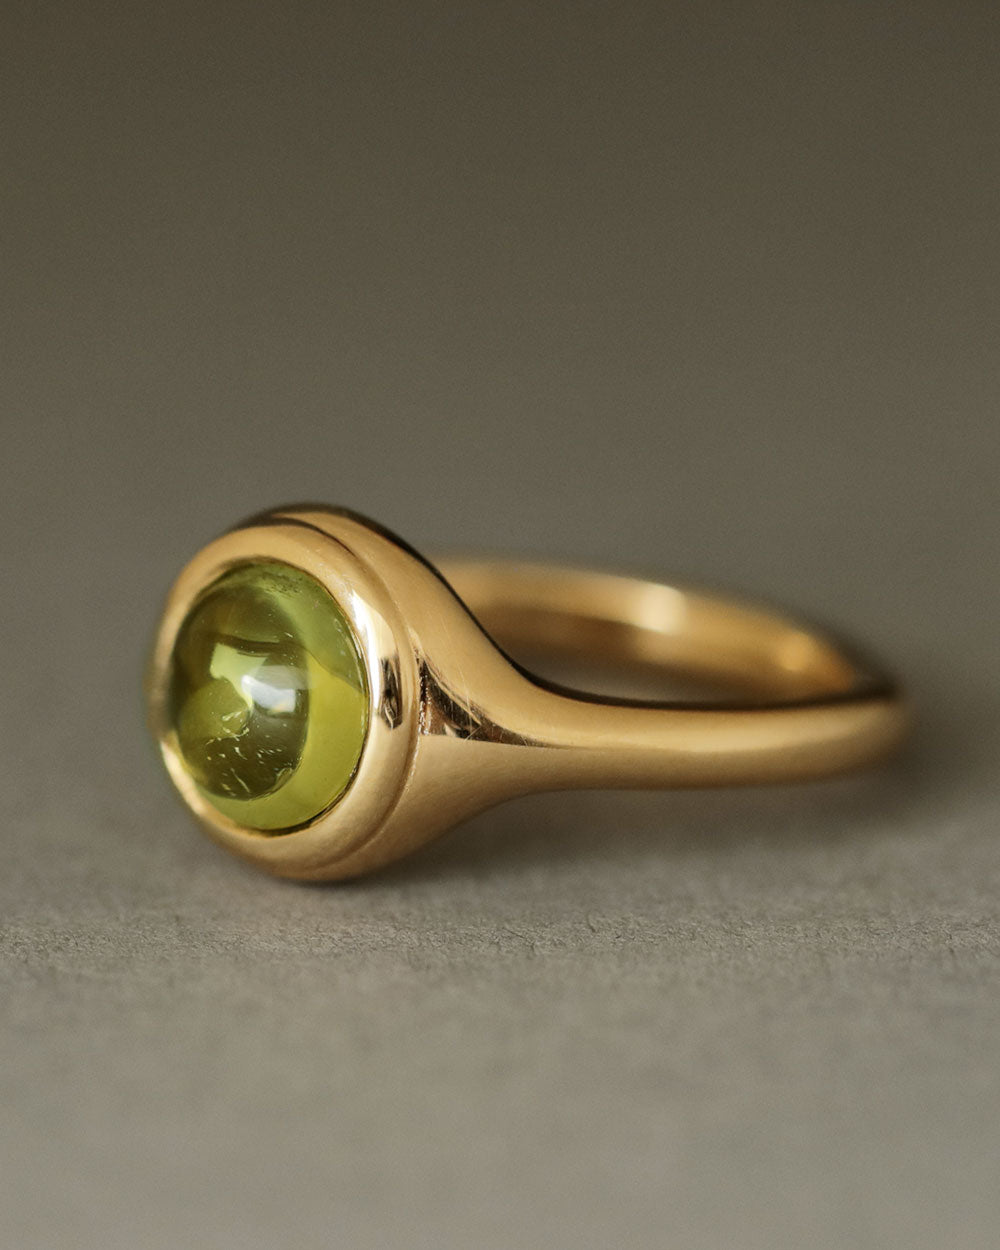 Duchess Ring by George Rings peridot cabochon solid 18k yellow gold